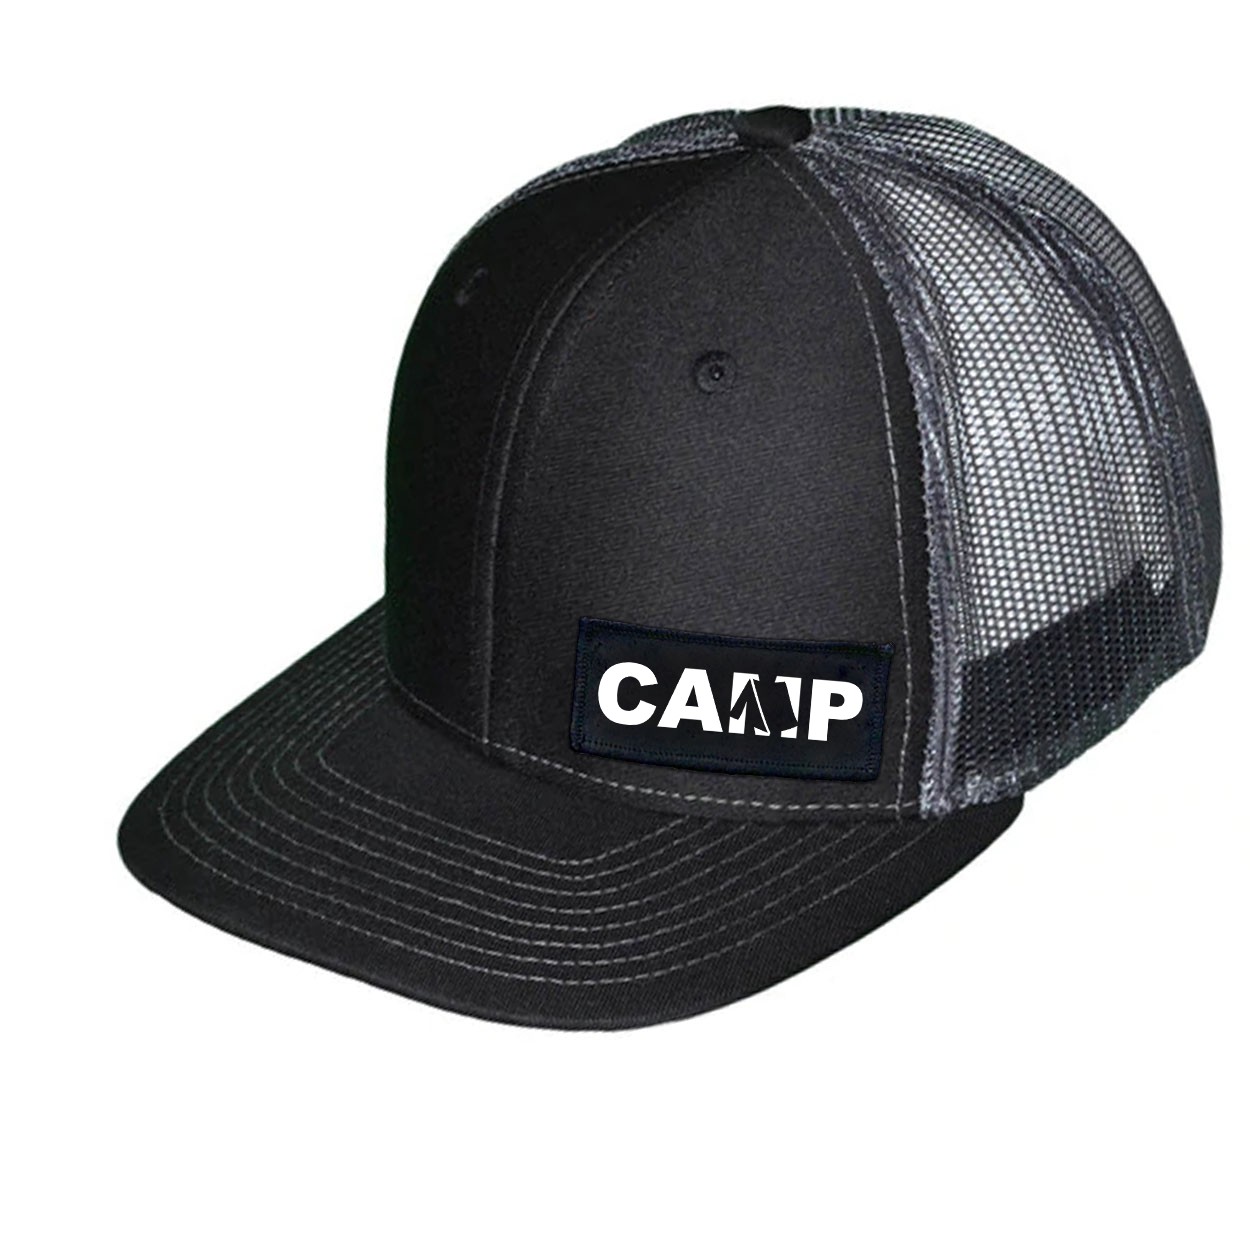 Camp Tent Logo Night Out Woven Patch Snapback Trucker Hat Black/Dark Gray (White Logo)